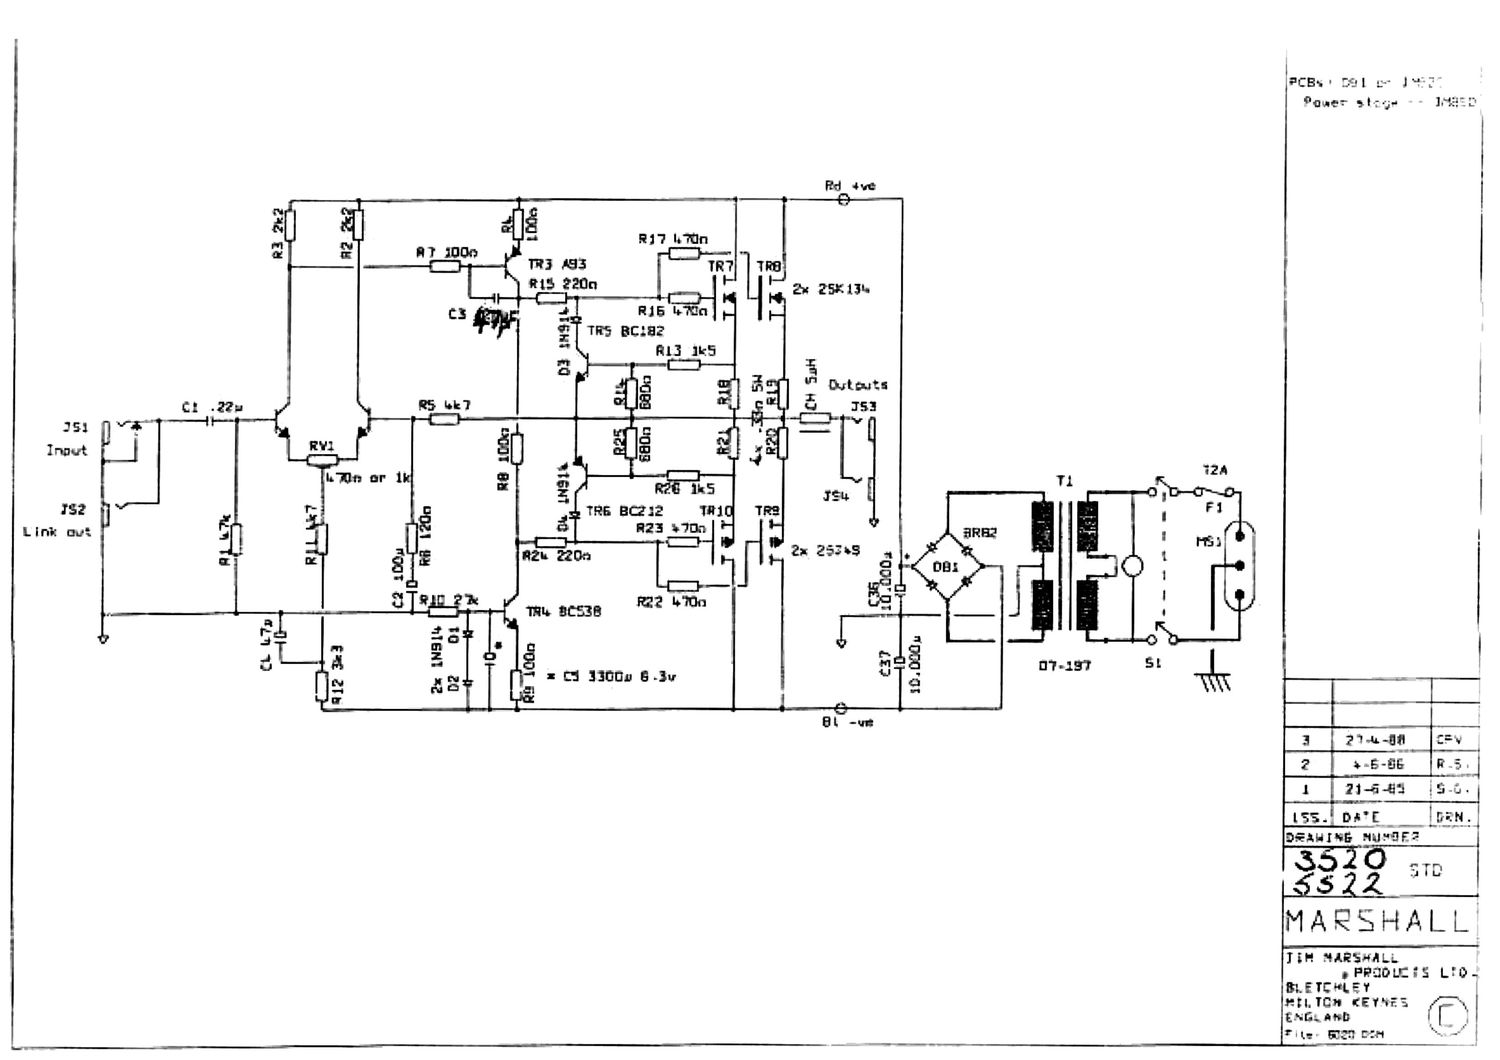 Marshall 3520 Power Amps Schematic